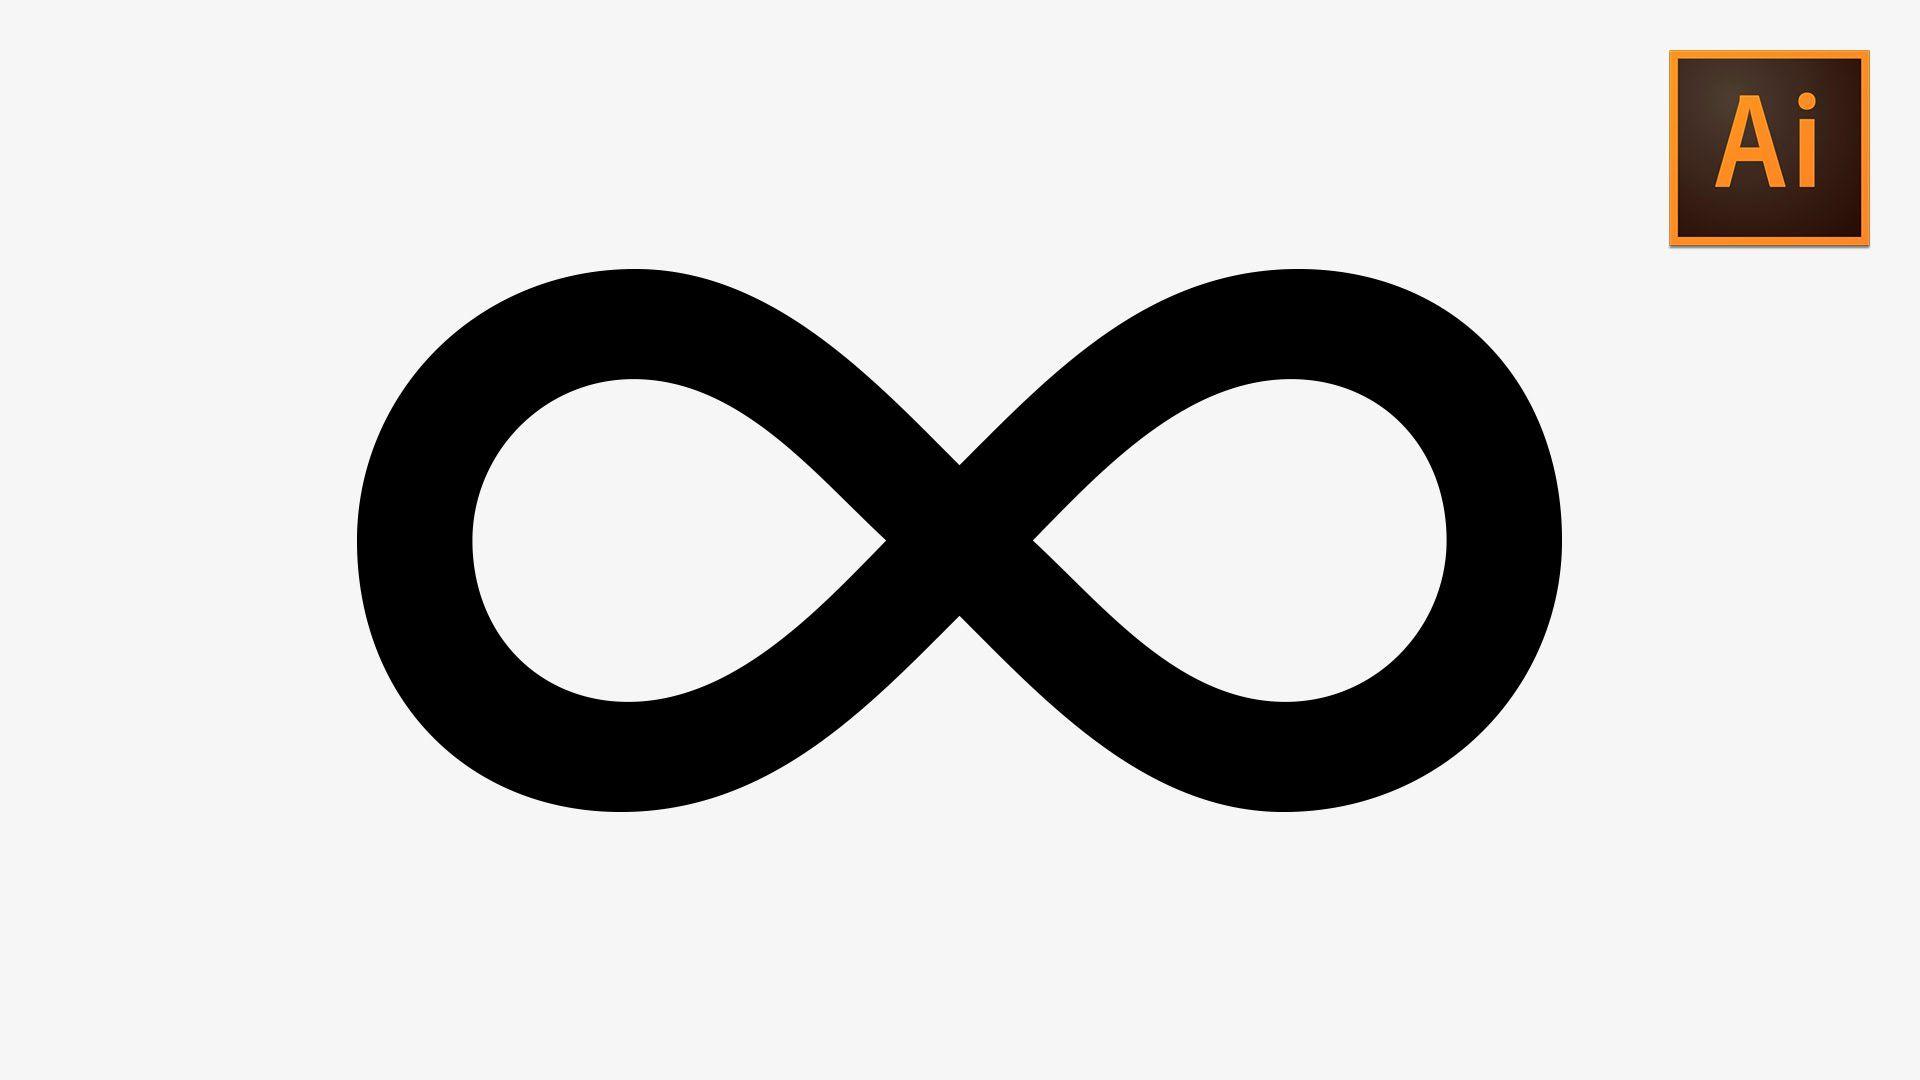 Infinity Symbol Logo - Learn How to Quickly Create an Infinity Symbol in Adobe Illustrator ...